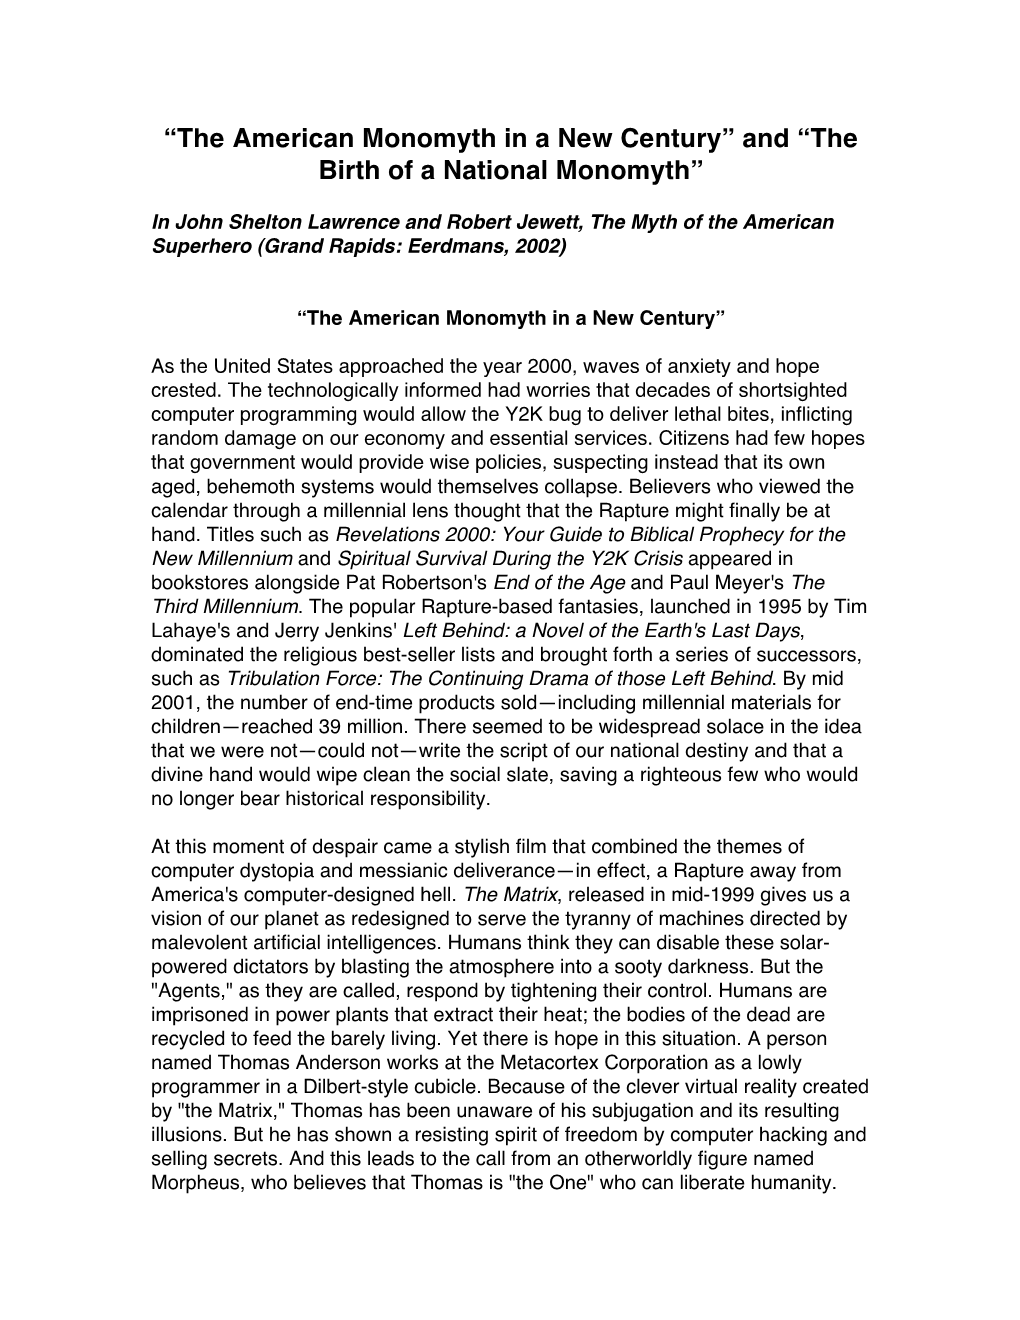 The American Monomyth in a New Century” and “The Birth of a National Monomyth”